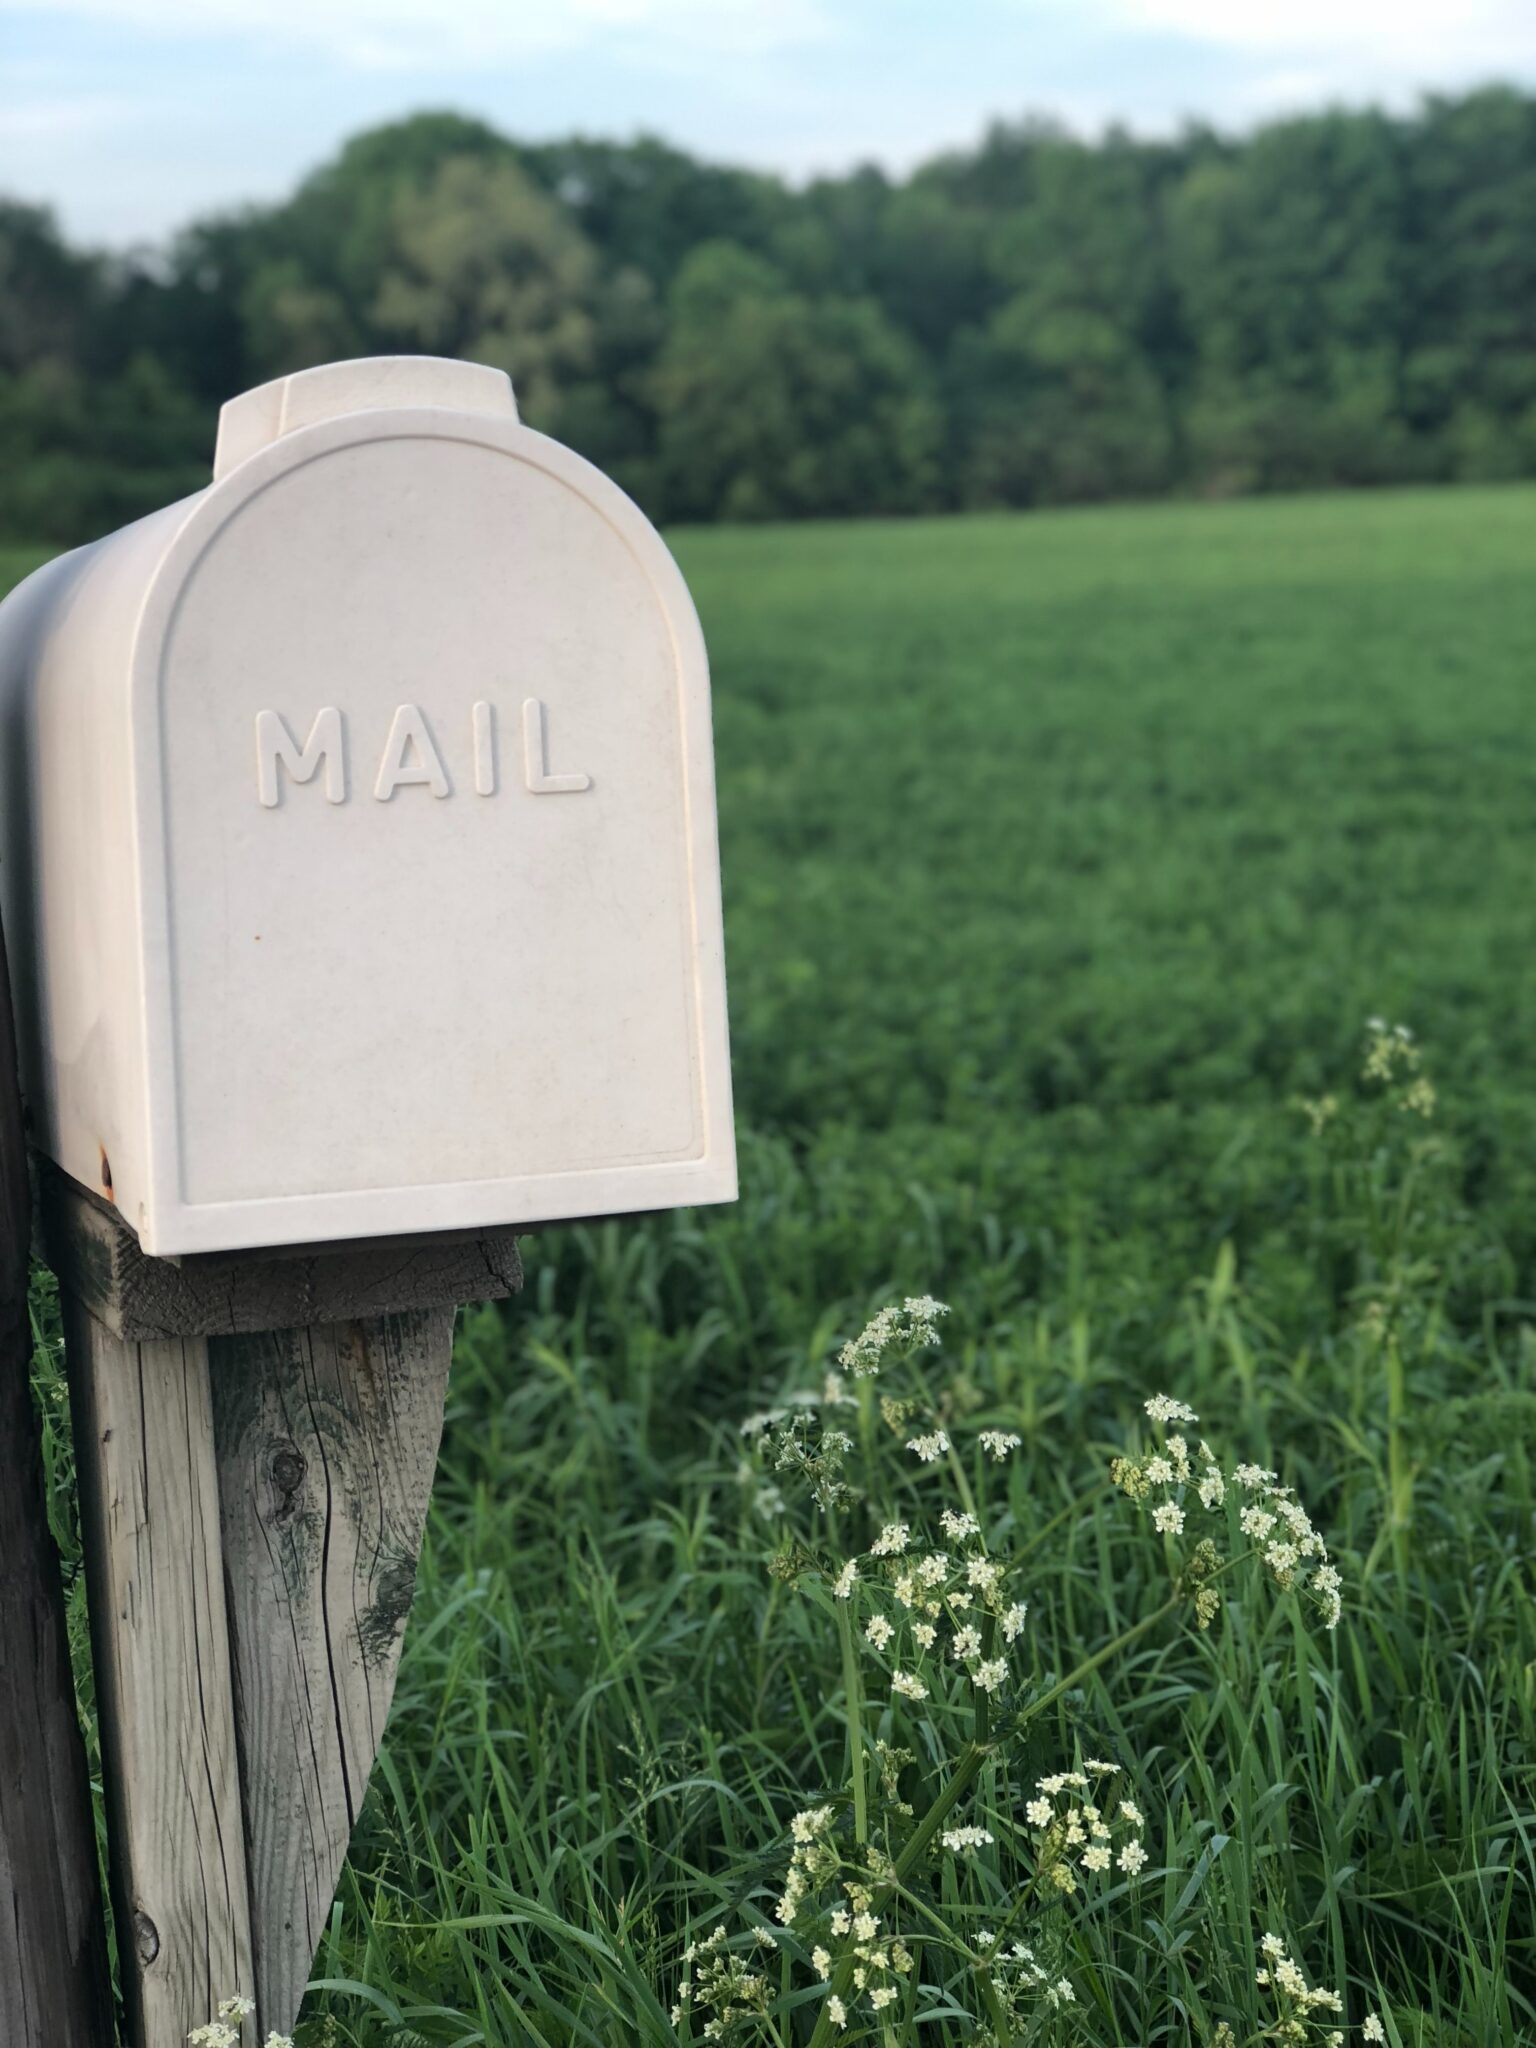 Why Voting By Mail is a Really Bad Idea - Politics and Religion